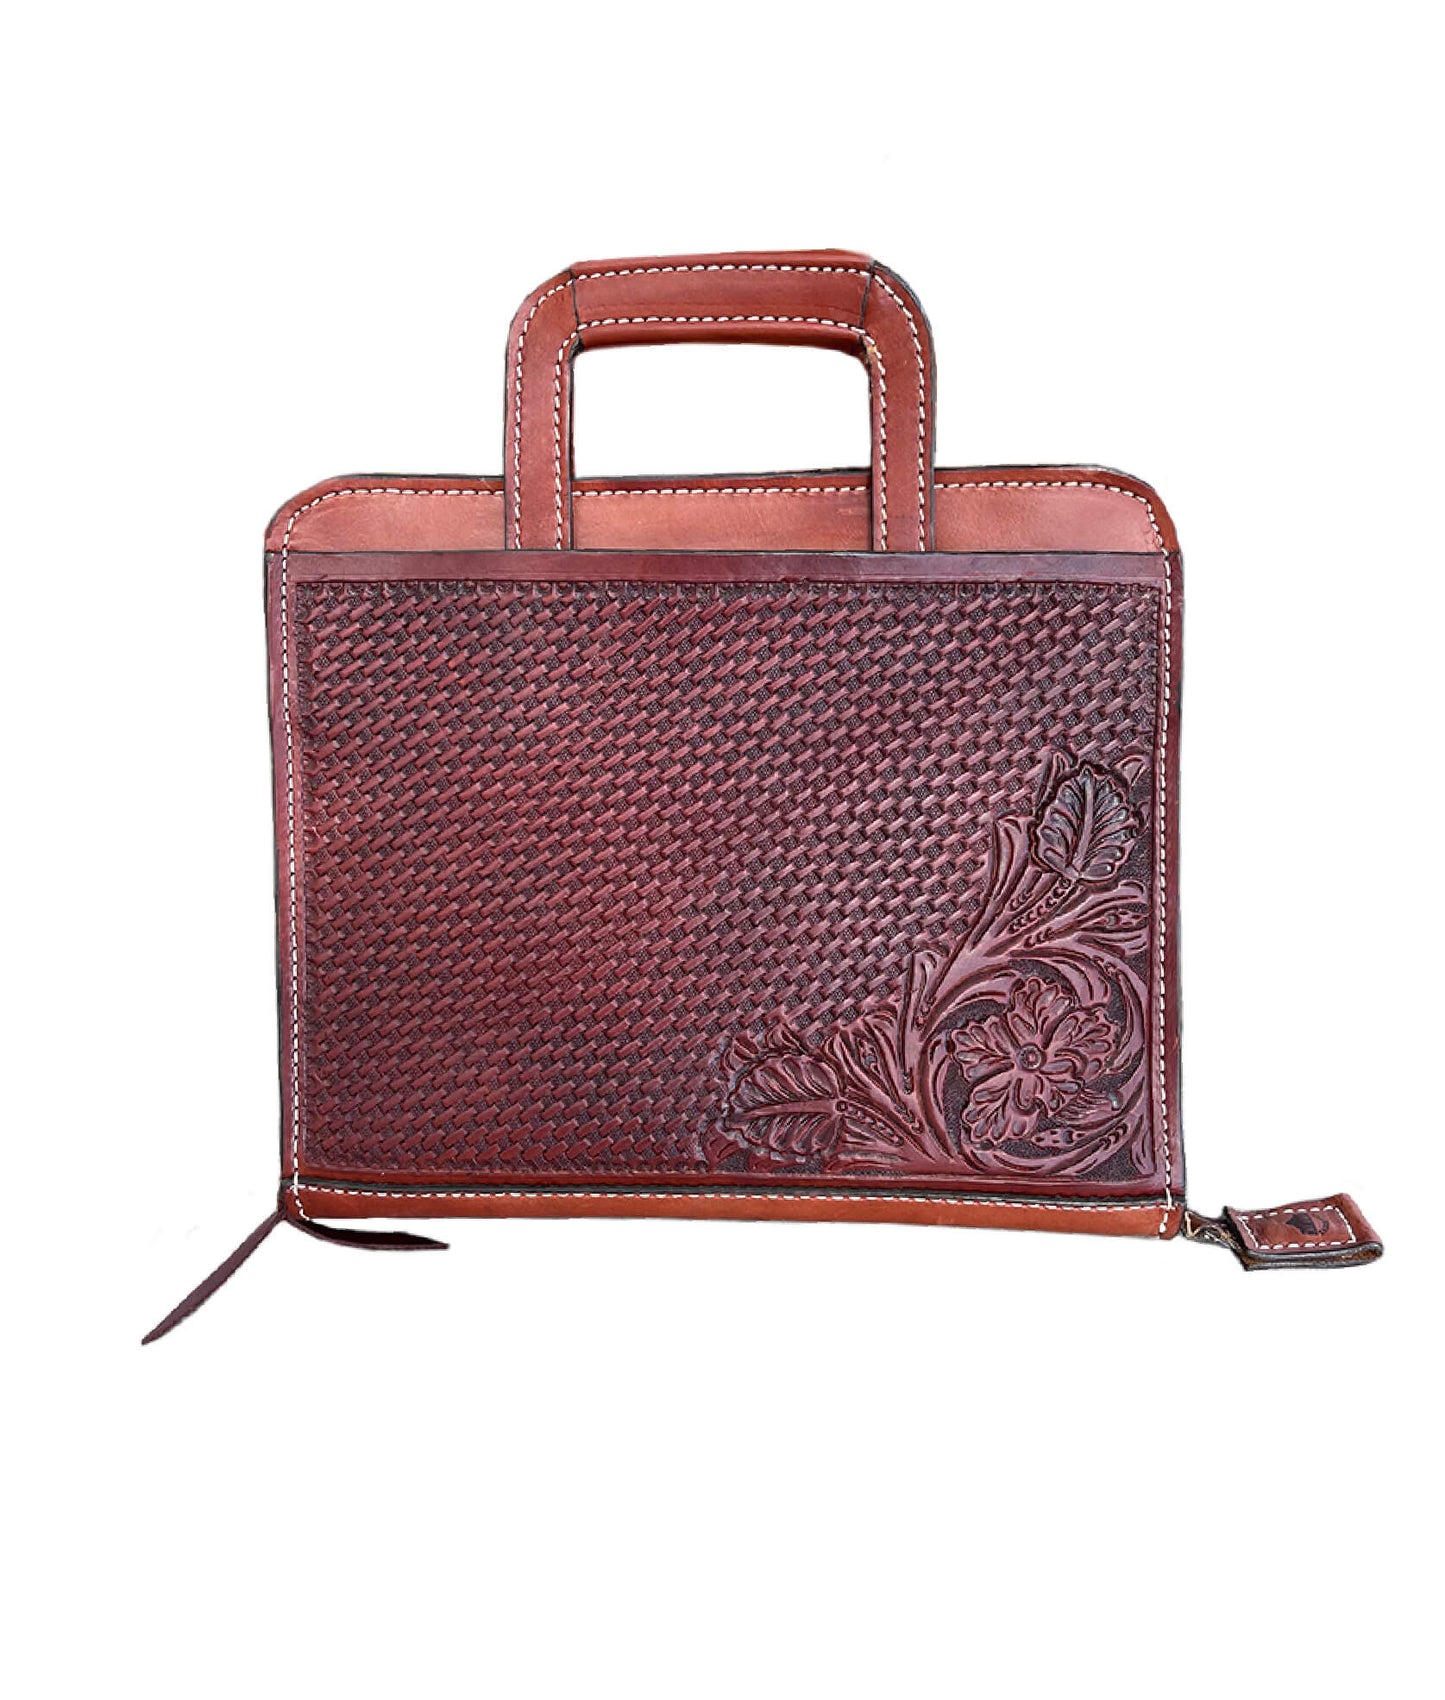 Cowboy Briefcase toast leather basket and wild rose tooling